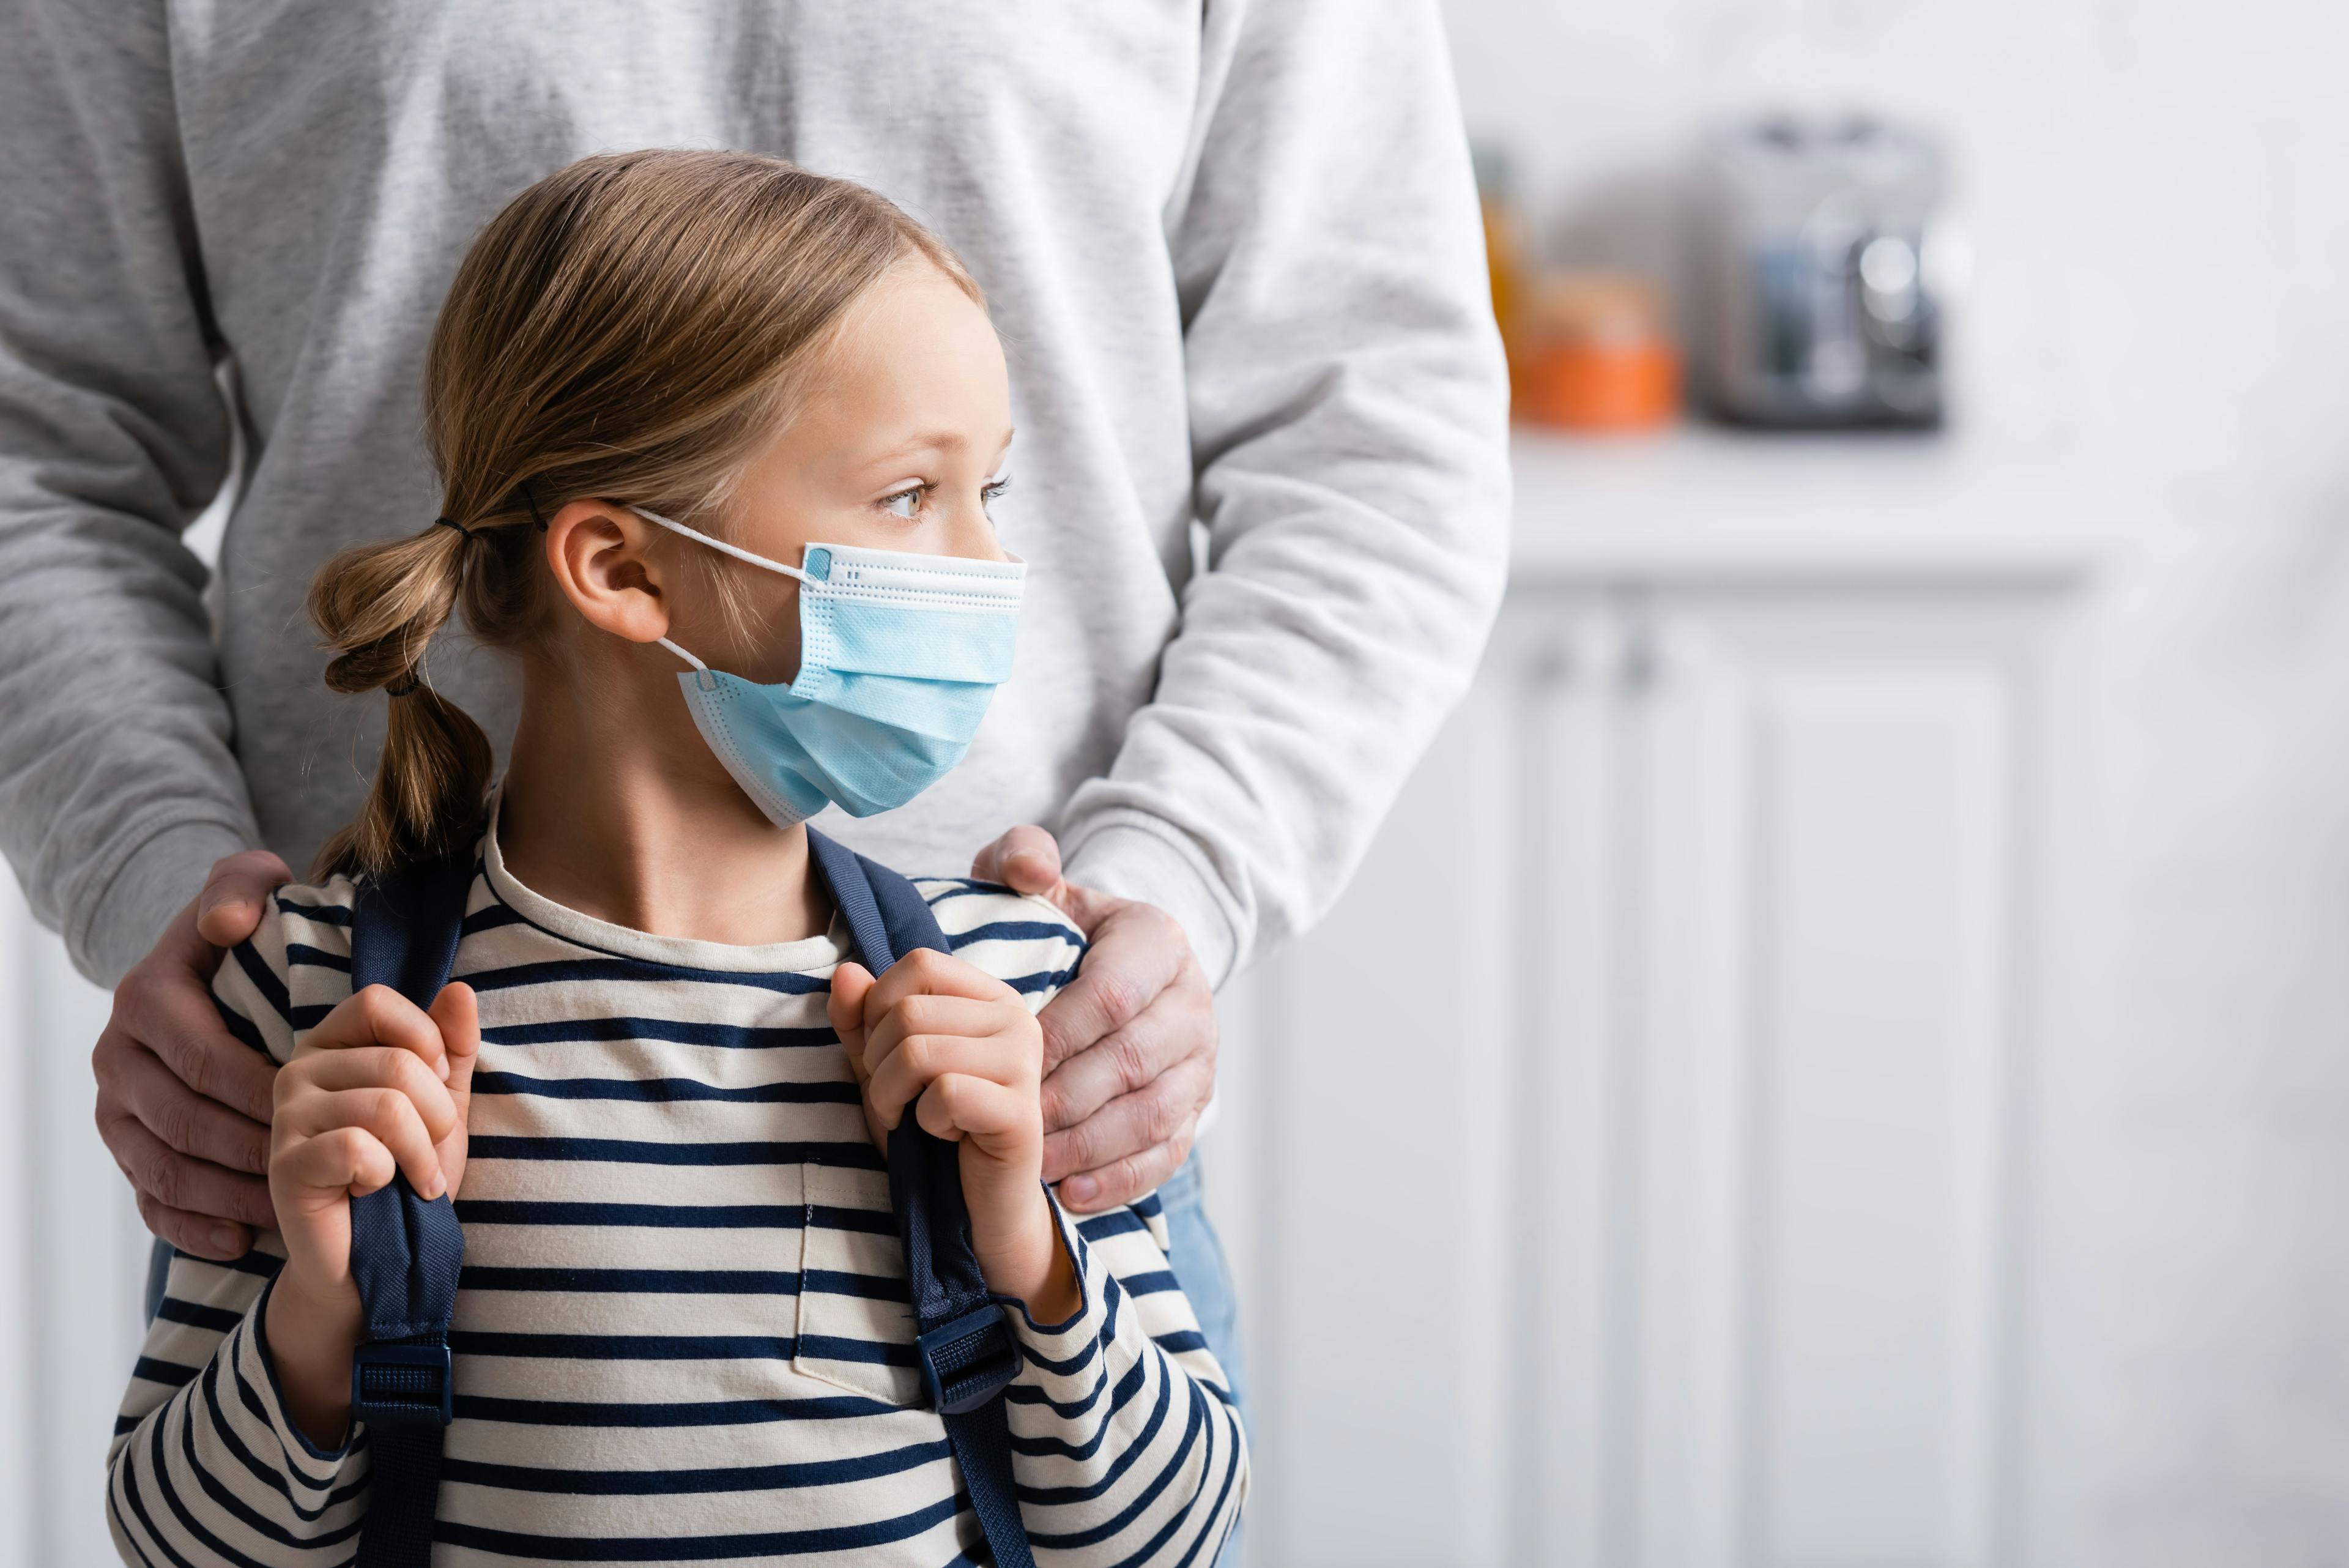 The most common reasons parents cited for hiding a child’s COVID-19 infection included an inability to stay home from work and wanting to make decisions about their child’s health without outside input from authorities. 